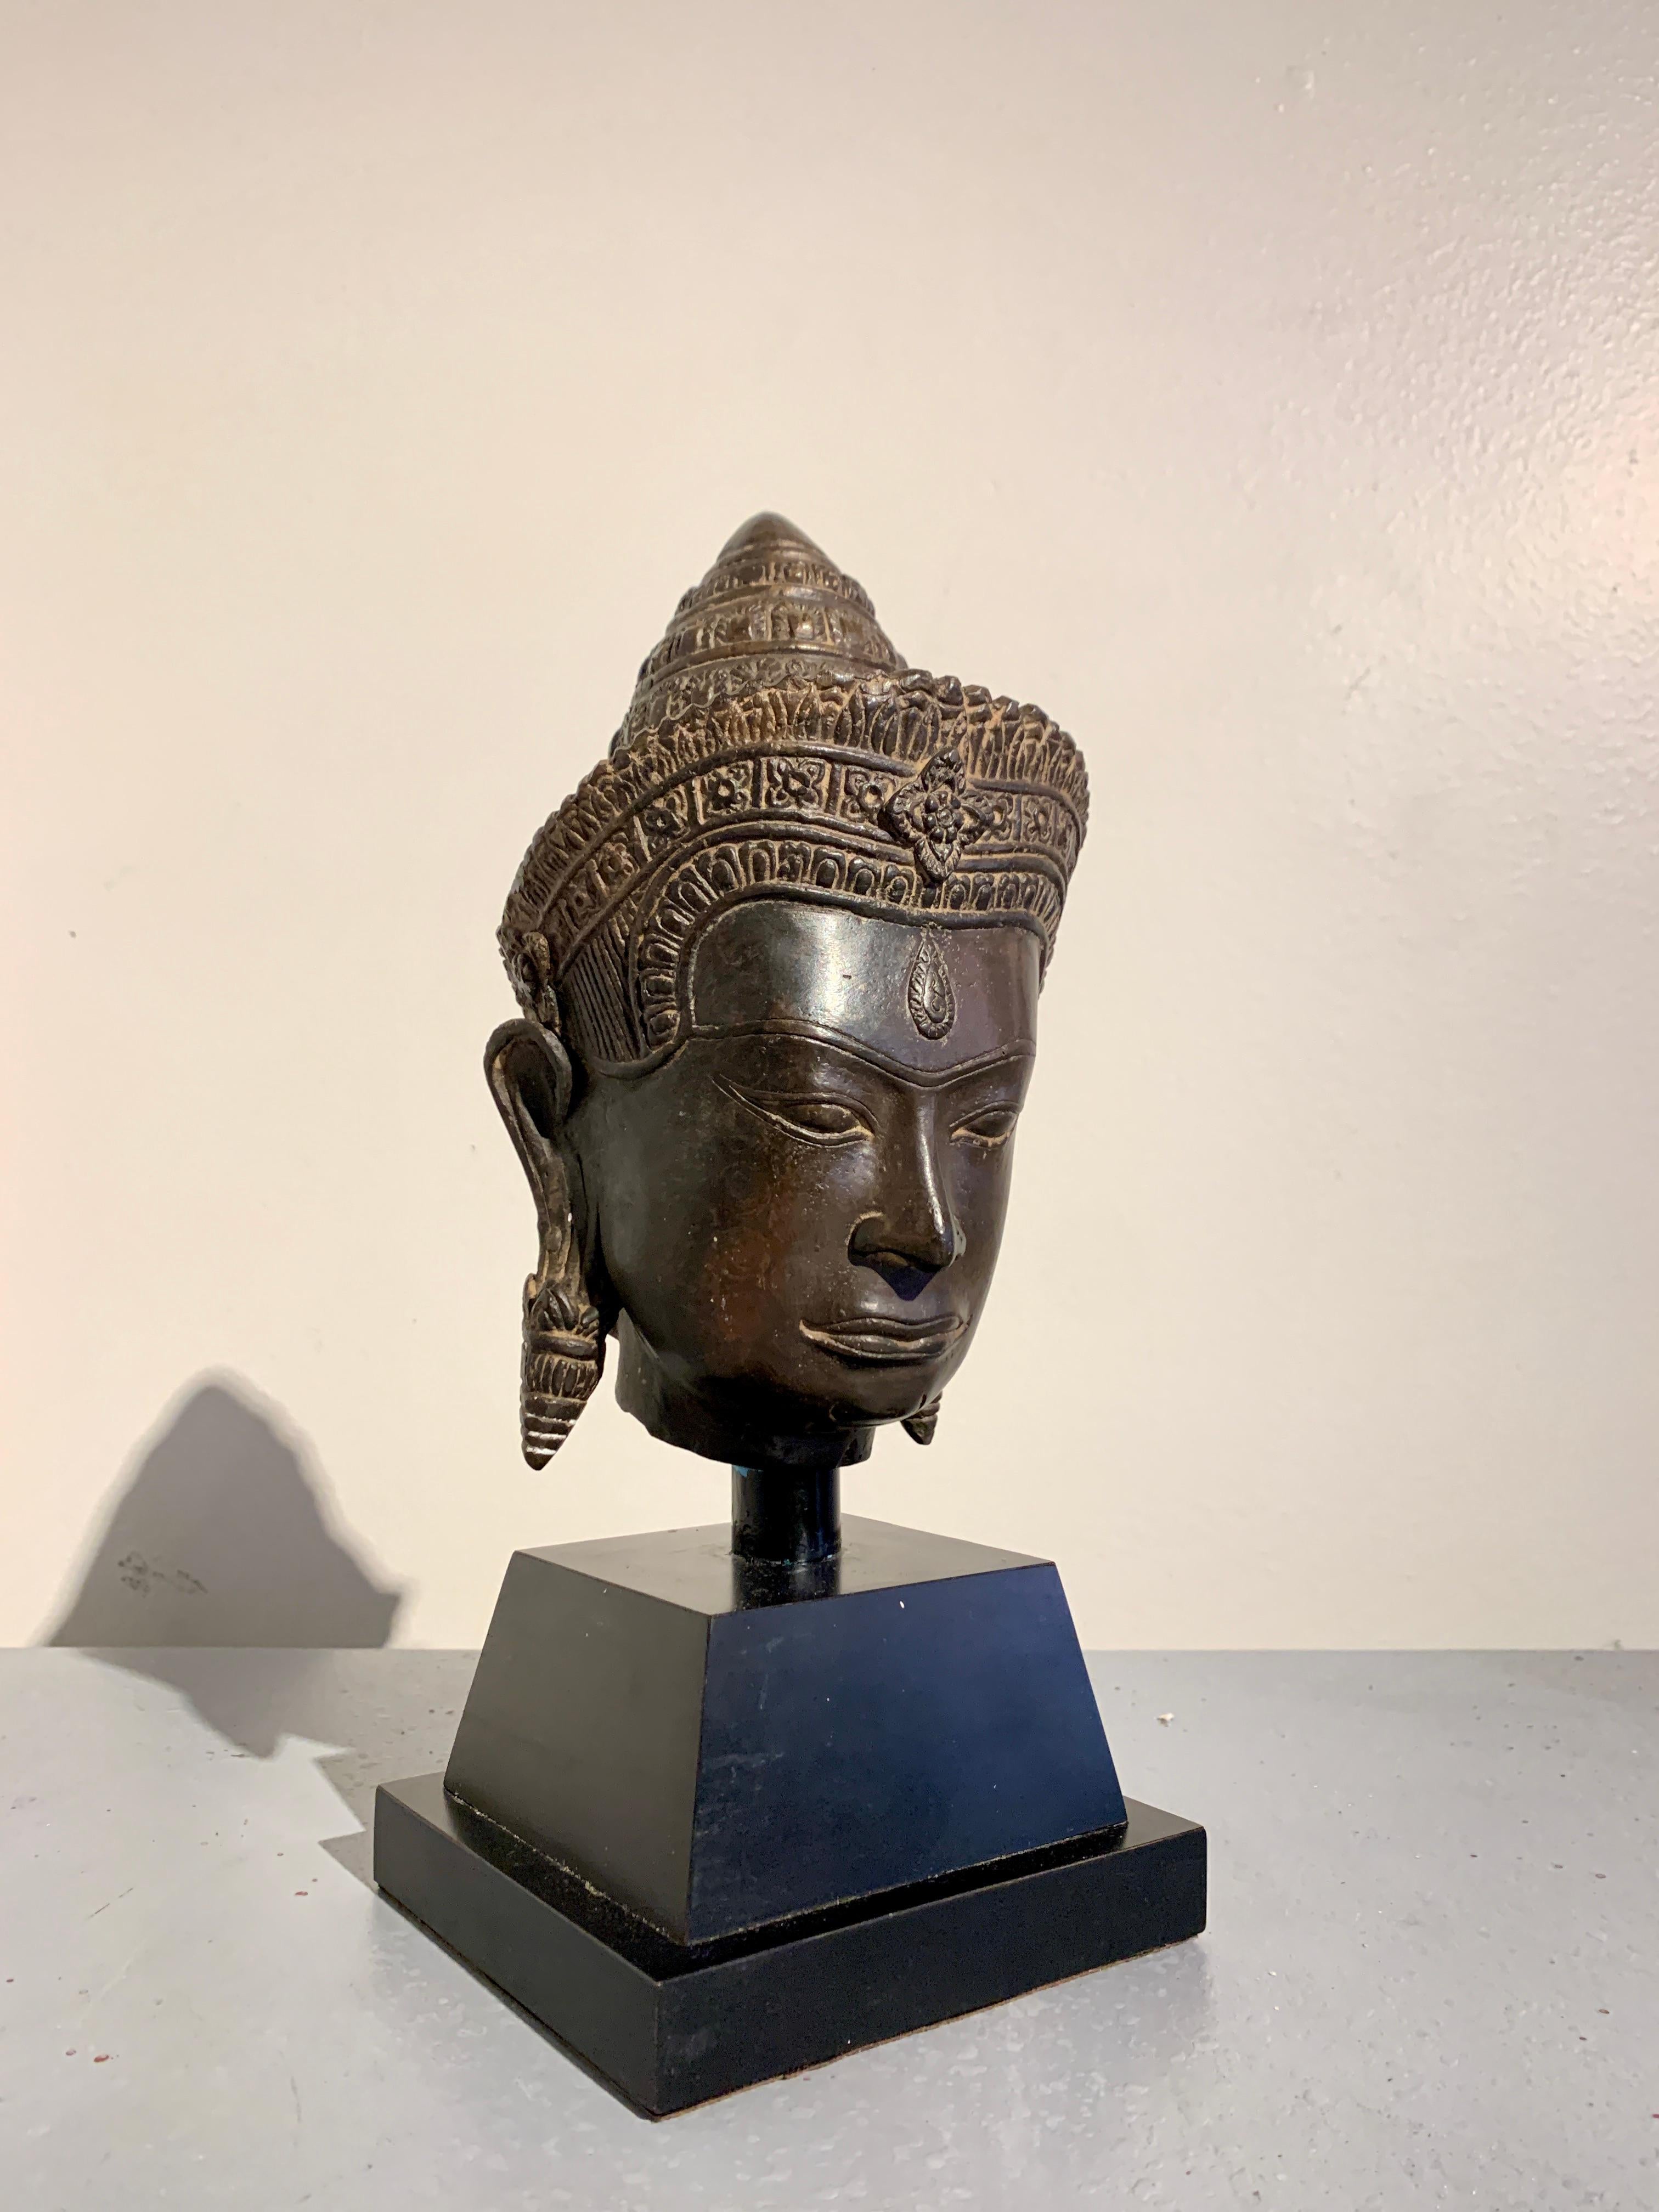 A well cast vintage Khmer, Angkor Wat style, bronze head of Shiva, circa 1970's, Thailand.

Shiva, the Hindu god of creation, change and destruction, is identified by the third eye in the center of his forehead. His highly stylized face features